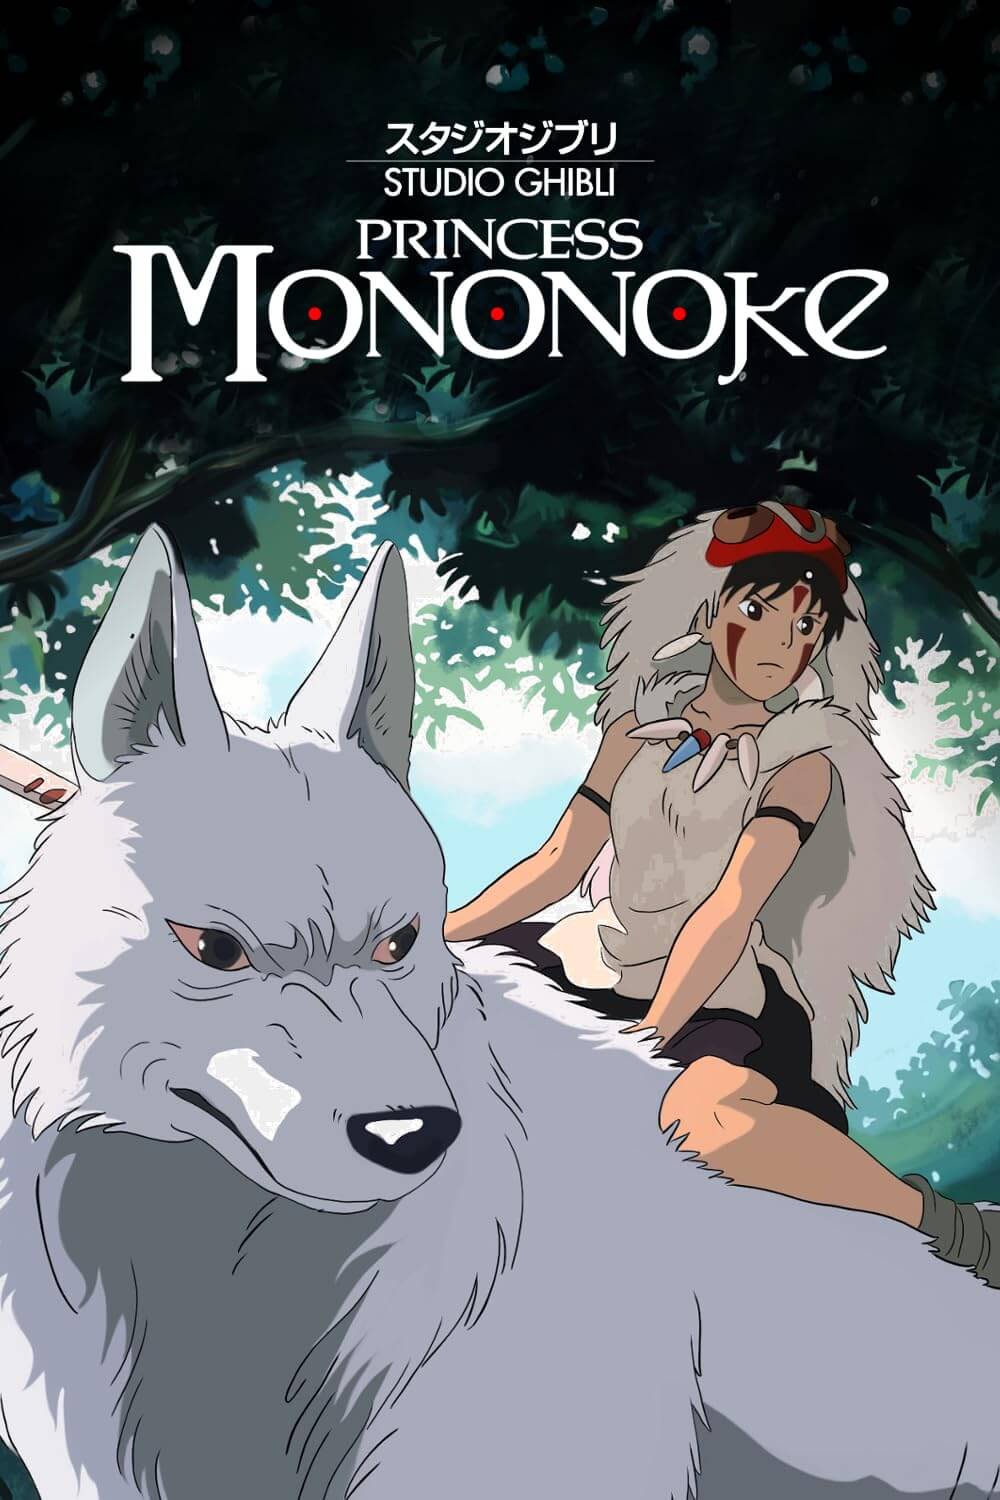 Watch Princess Mononoke today, it's one of the best Studio Ghibli movies for adults and teenagers (12+ year olds).